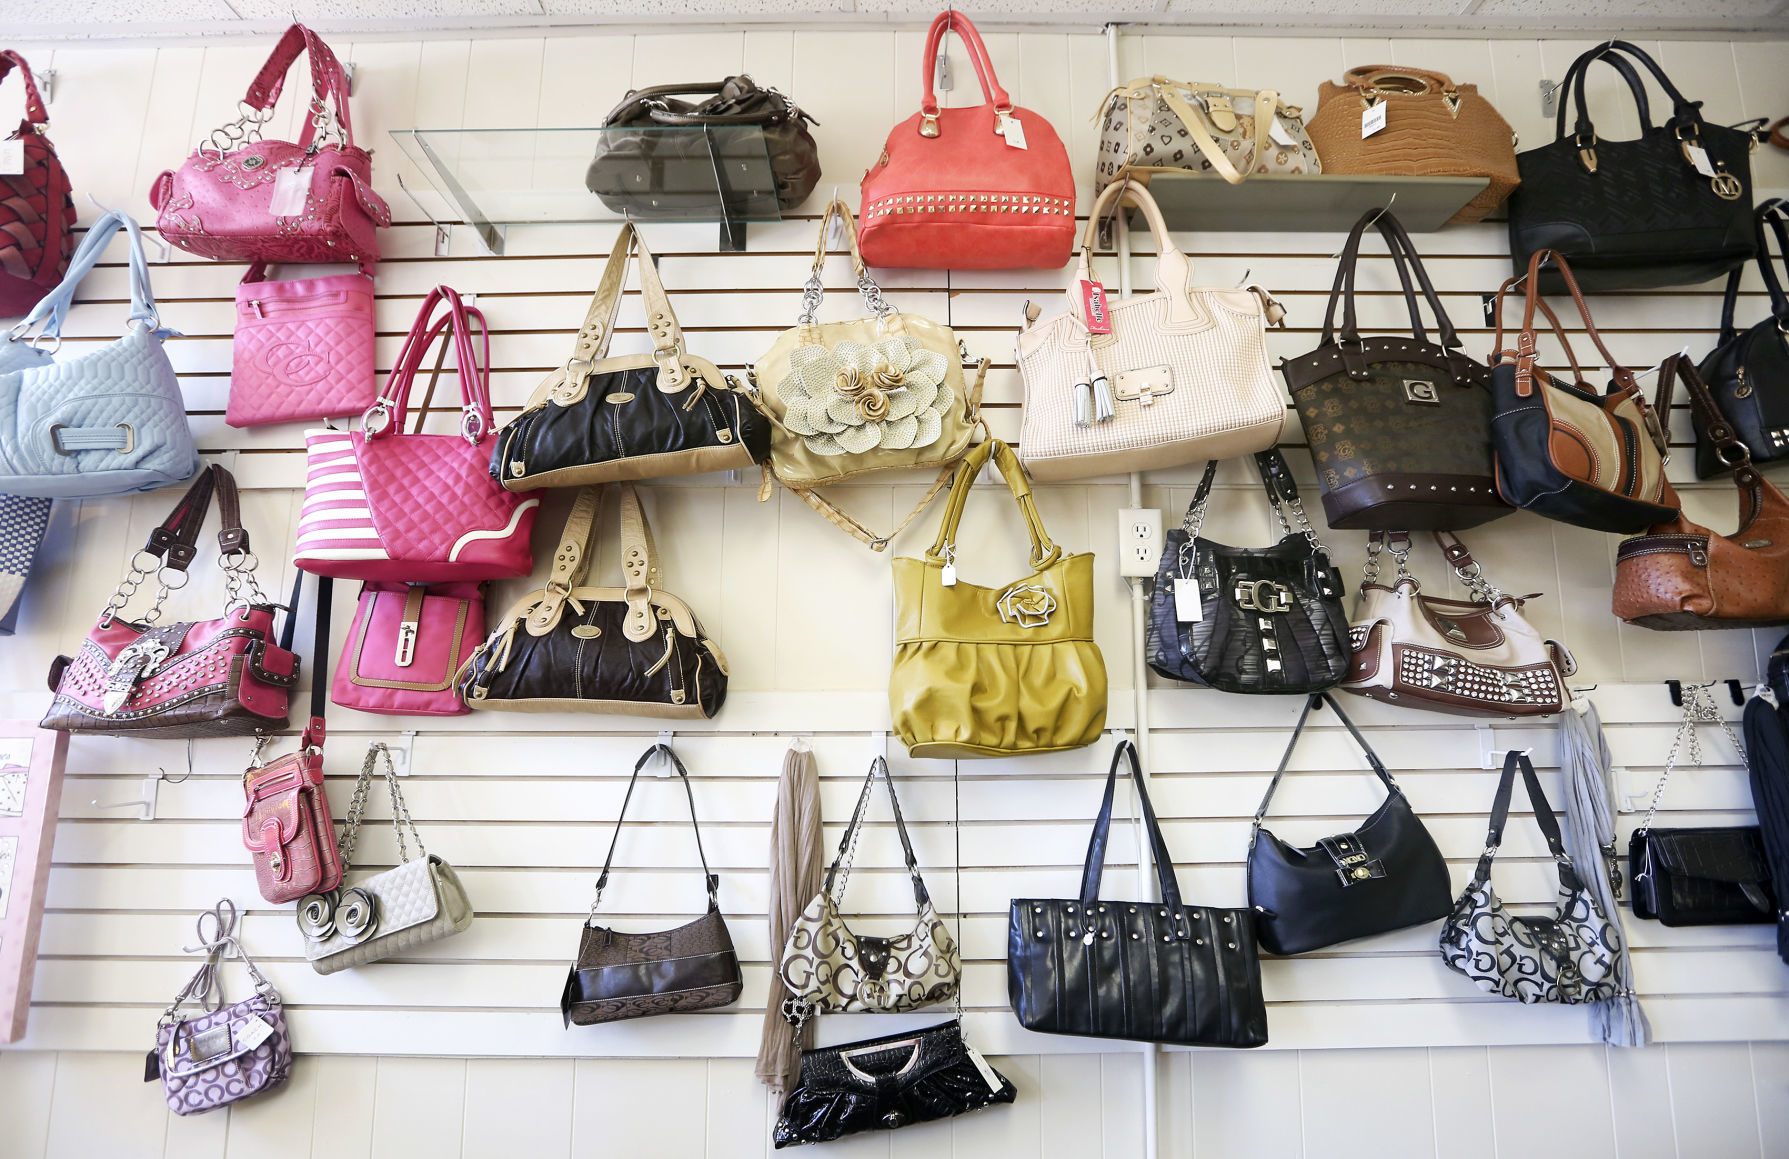 Purses for sale at The Jewelry Box in Dubuque on Thursday, June 25, 2020. PHOTO CREDIT: NICKI KOHL